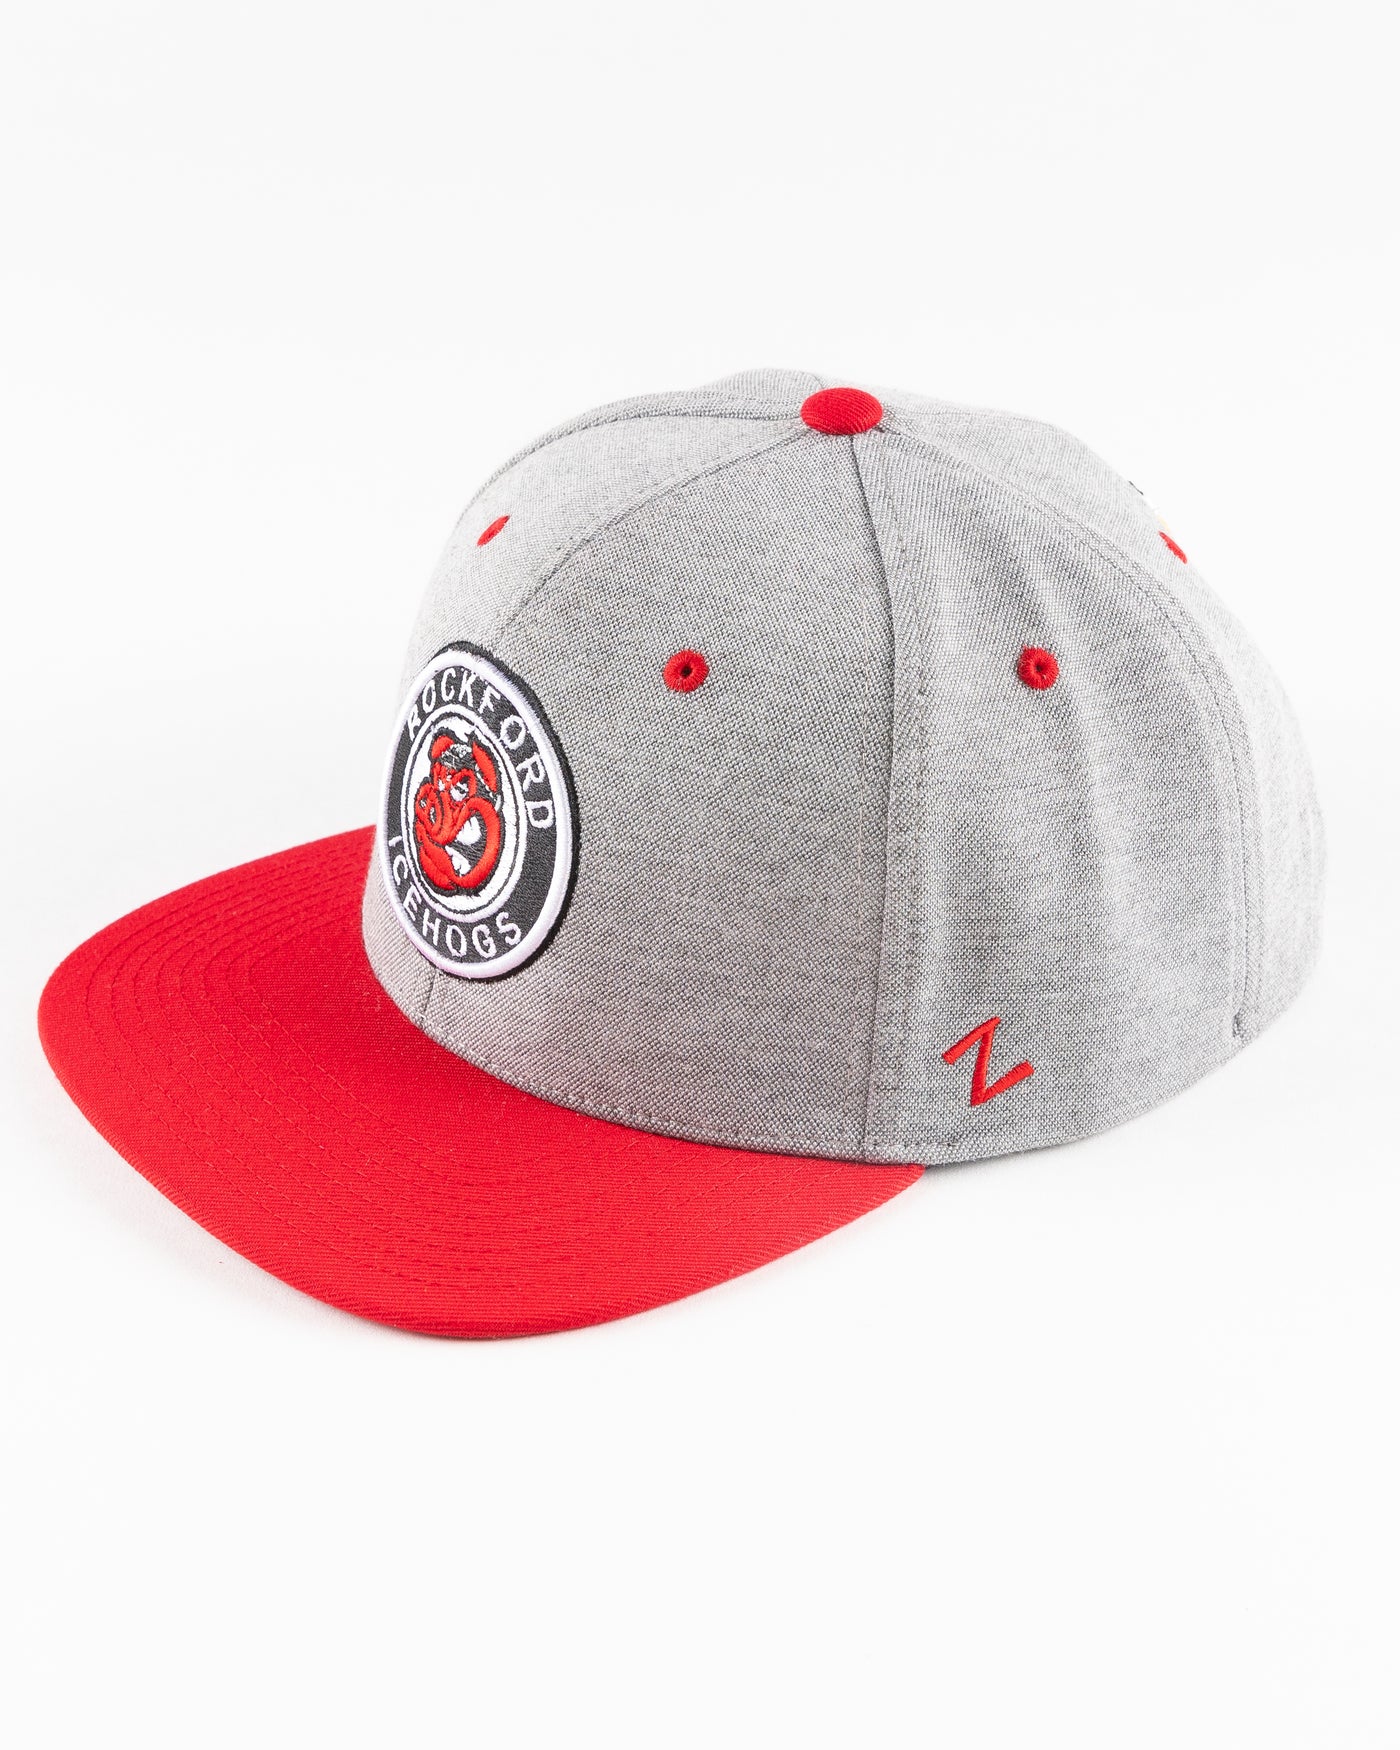 grey Rockford IceHogs snapback with red brim and embroidered IceHogs patch - left angle lay flat